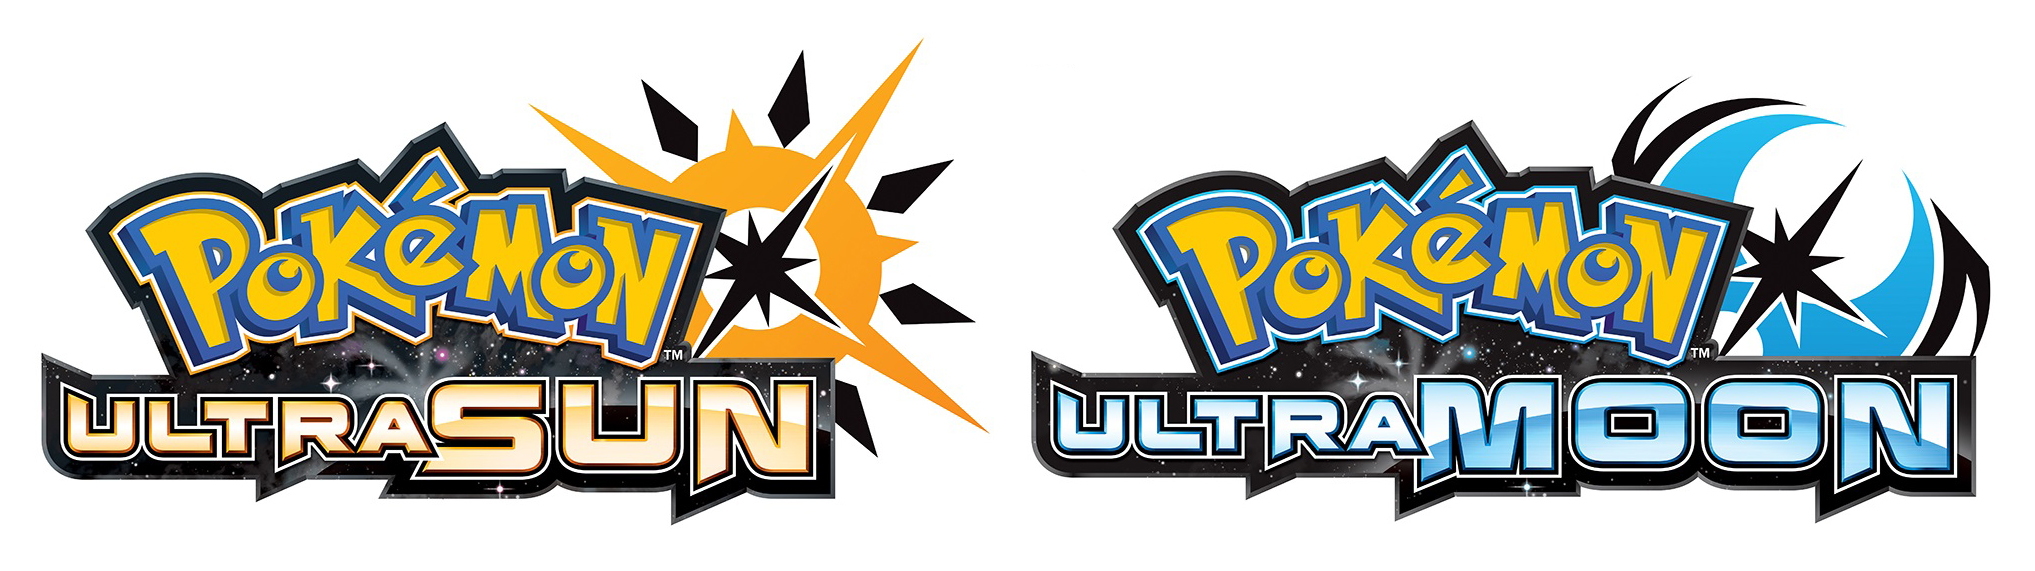 All Games Delta: Pokémon Ultra Sun and Ultra Moon New Trailer and Info